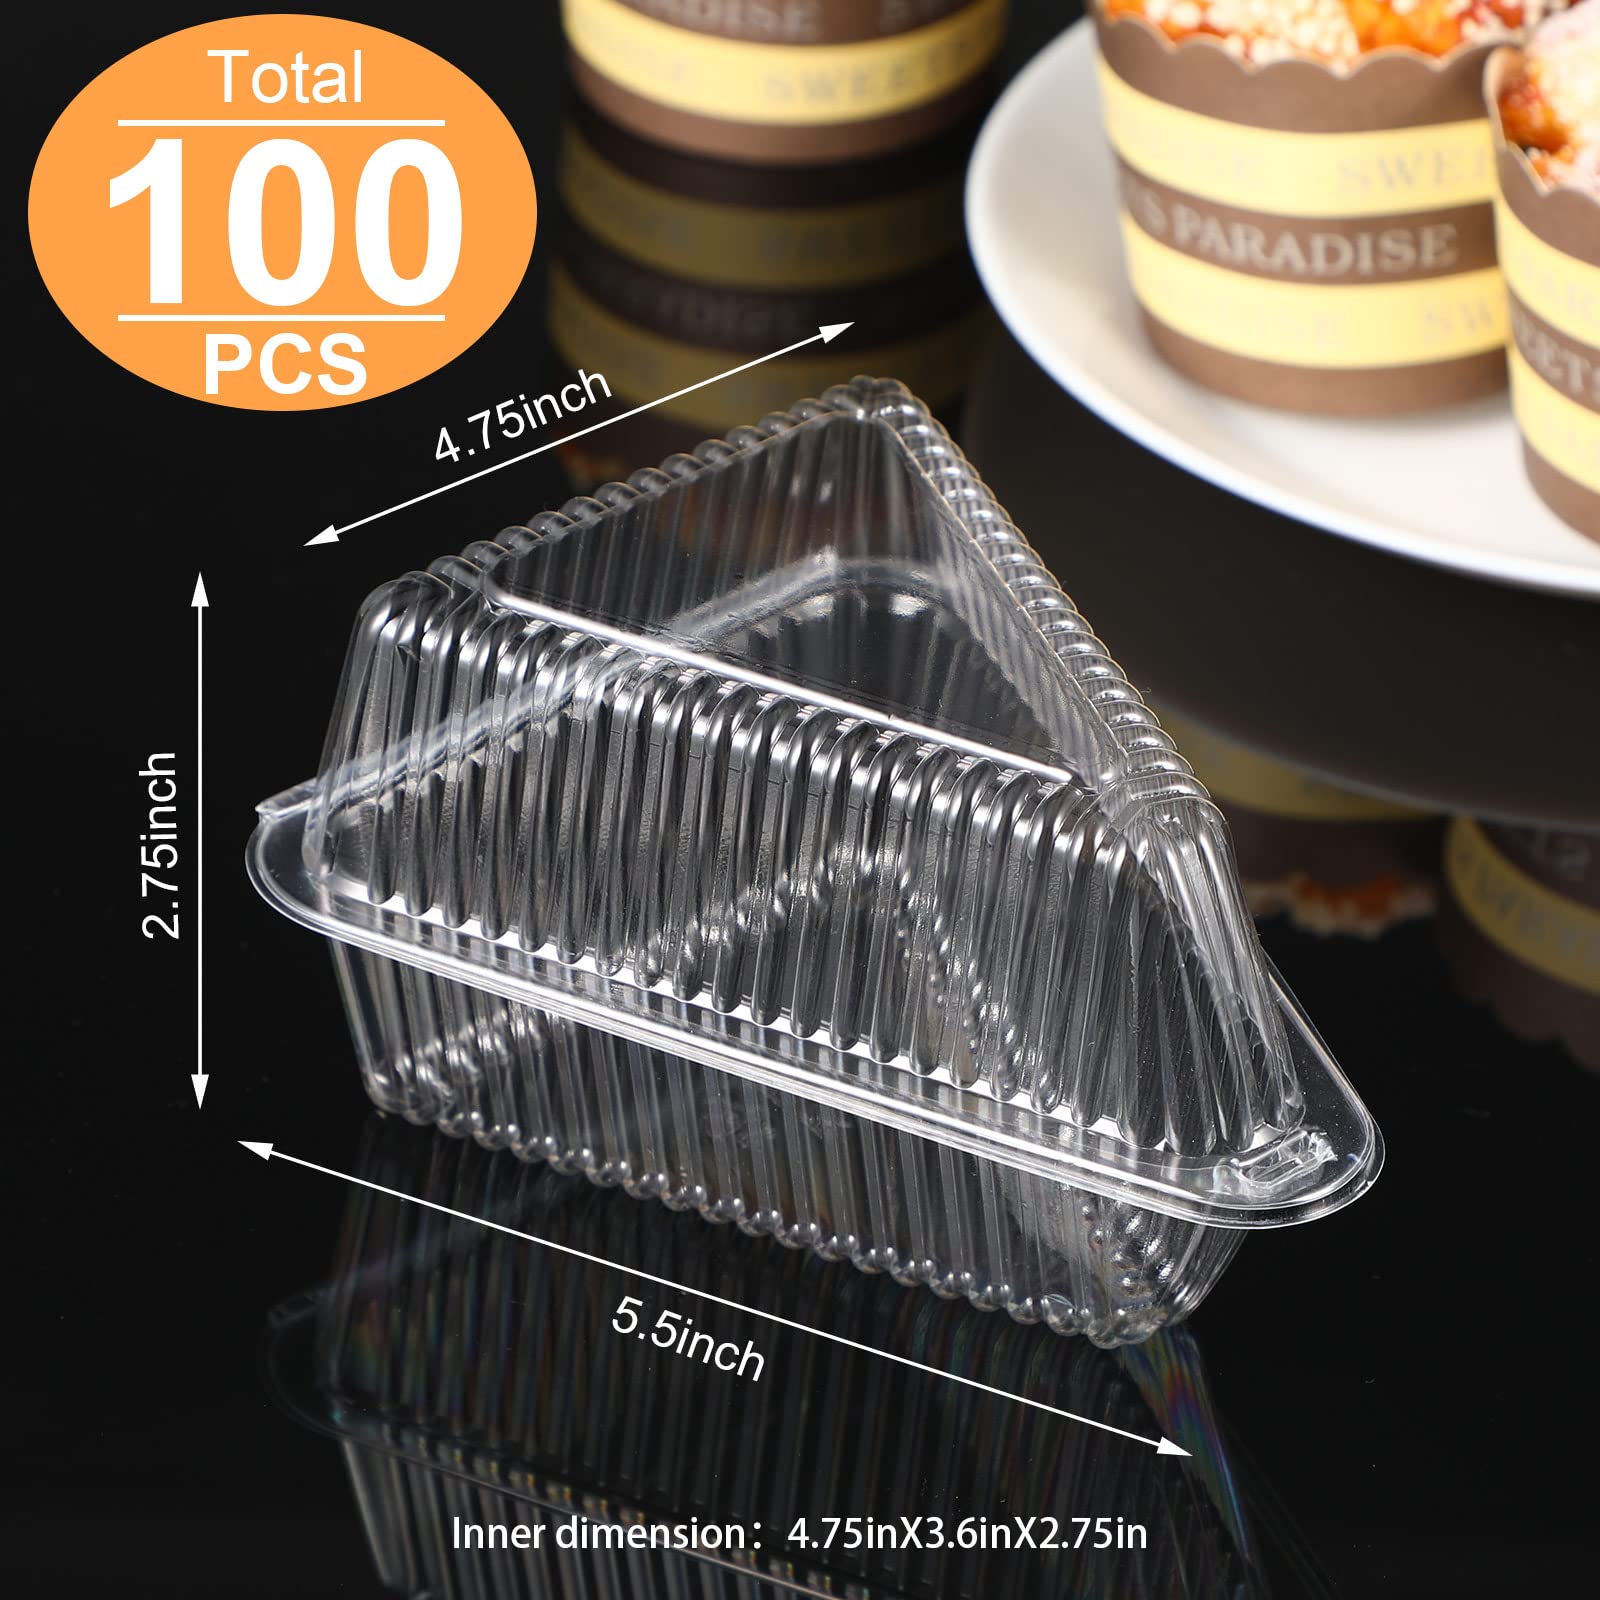 100 Piece Pie Container with Lid Clear Cake Slice Container Plastic Medium Dome Hinged Lid Cheesecake Container, Pie Dessert, Food Box, Take out Packaging for Home, Bakery and Cafe Business